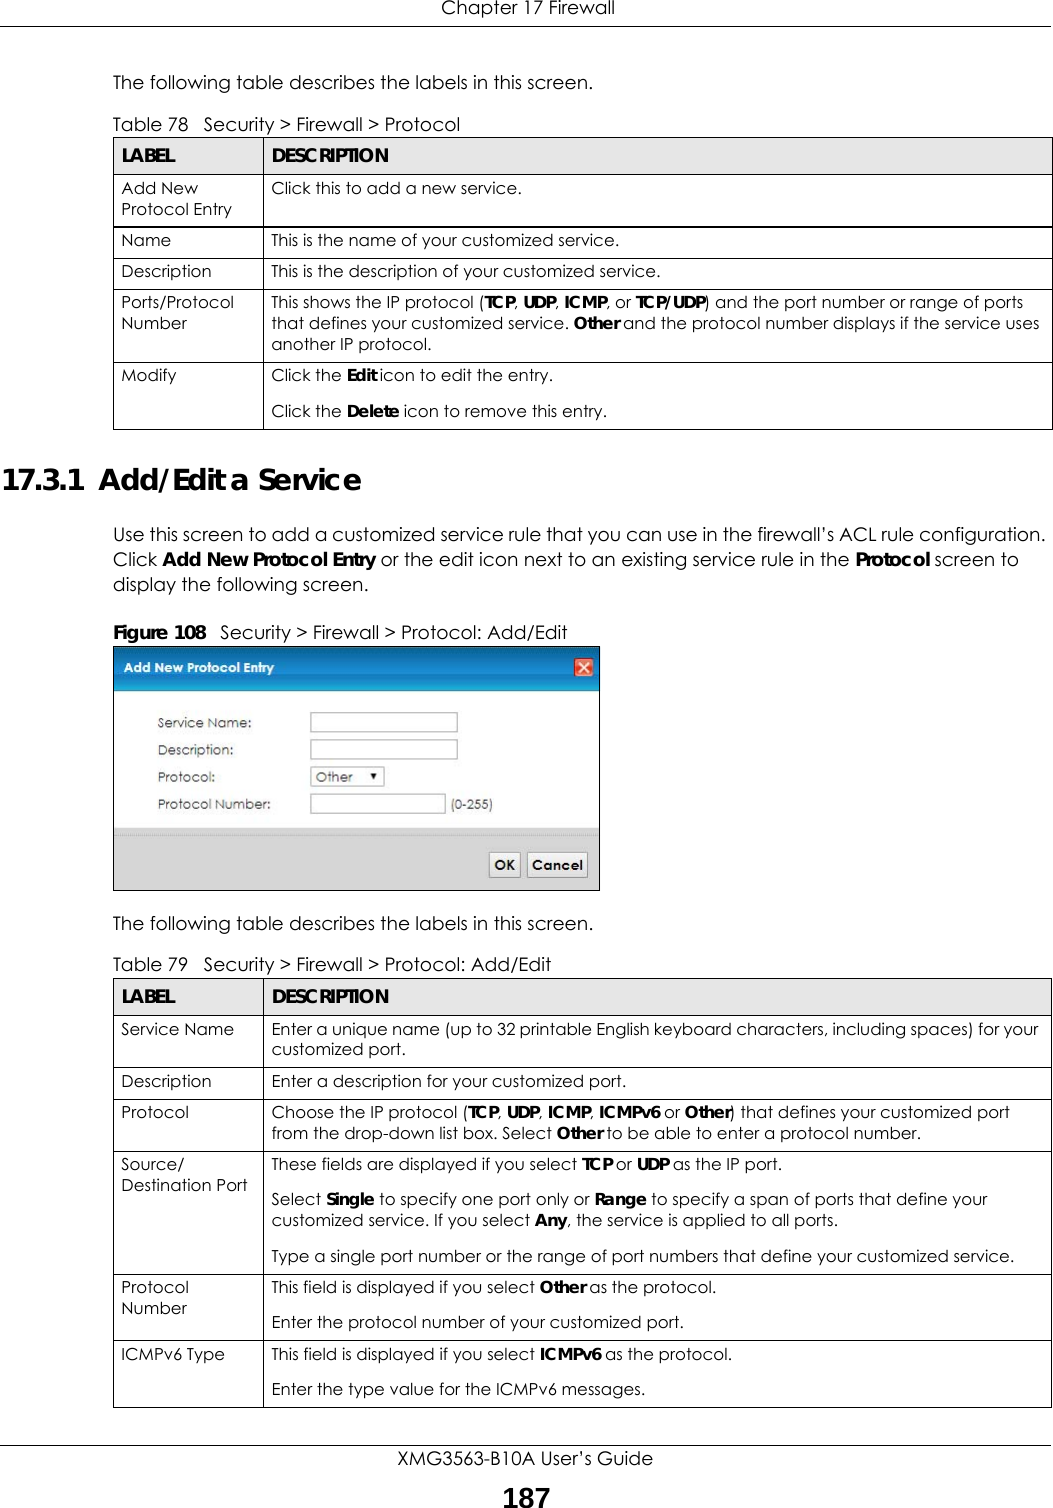  Chapter 17 FirewallXMG3563-B10A User’s Guide187The following table describes the labels in this screen. 17.3.1  Add/Edit a Service Use this screen to add a customized service rule that you can use in the firewall’s ACL rule configuration. Click Add New Protocol Entry or the edit icon next to an existing service rule in the Protocol screen to display the following screen.Figure 108   Security &gt; Firewall &gt; Protocol: Add/EditThe following table describes the labels in this screen.Table 78   Security &gt; Firewall &gt; ProtocolLABEL DESCRIPTIONAdd New Protocol EntryClick this to add a new service.Name This is the name of your customized service.Description This is the description of your customized service.Ports/Protocol NumberThis shows the IP protocol (TCP, UDP, ICMP, or TCP/UDP) and the port number or range of ports that defines your customized service. Other and the protocol number displays if the service uses another IP protocol.Modify Click the Edit icon to edit the entry.Click the Delete icon to remove this entry.Table 79   Security &gt; Firewall &gt; Protocol: Add/EditLABEL DESCRIPTIONService Name Enter a unique name (up to 32 printable English keyboard characters, including spaces) for your customized port. Description Enter a description for your customized port.Protocol Choose the IP protocol (TCP, UDP, ICMP, ICMPv6 or Other) that defines your customized port from the drop-down list box. Select Other to be able to enter a protocol number.Source/Destination PortThese fields are displayed if you select TCP or UDP as the IP port. Select Single to specify one port only or Range to specify a span of ports that define your customized service. If you select Any, the service is applied to all ports.Type a single port number or the range of port numbers that define your customized service.Protocol NumberThis field is displayed if you select Other as the protocol.Enter the protocol number of your customized port. ICMPv6 Type This field is displayed if you select ICMPv6 as the protocol.Enter the type value for the ICMPv6 messages.